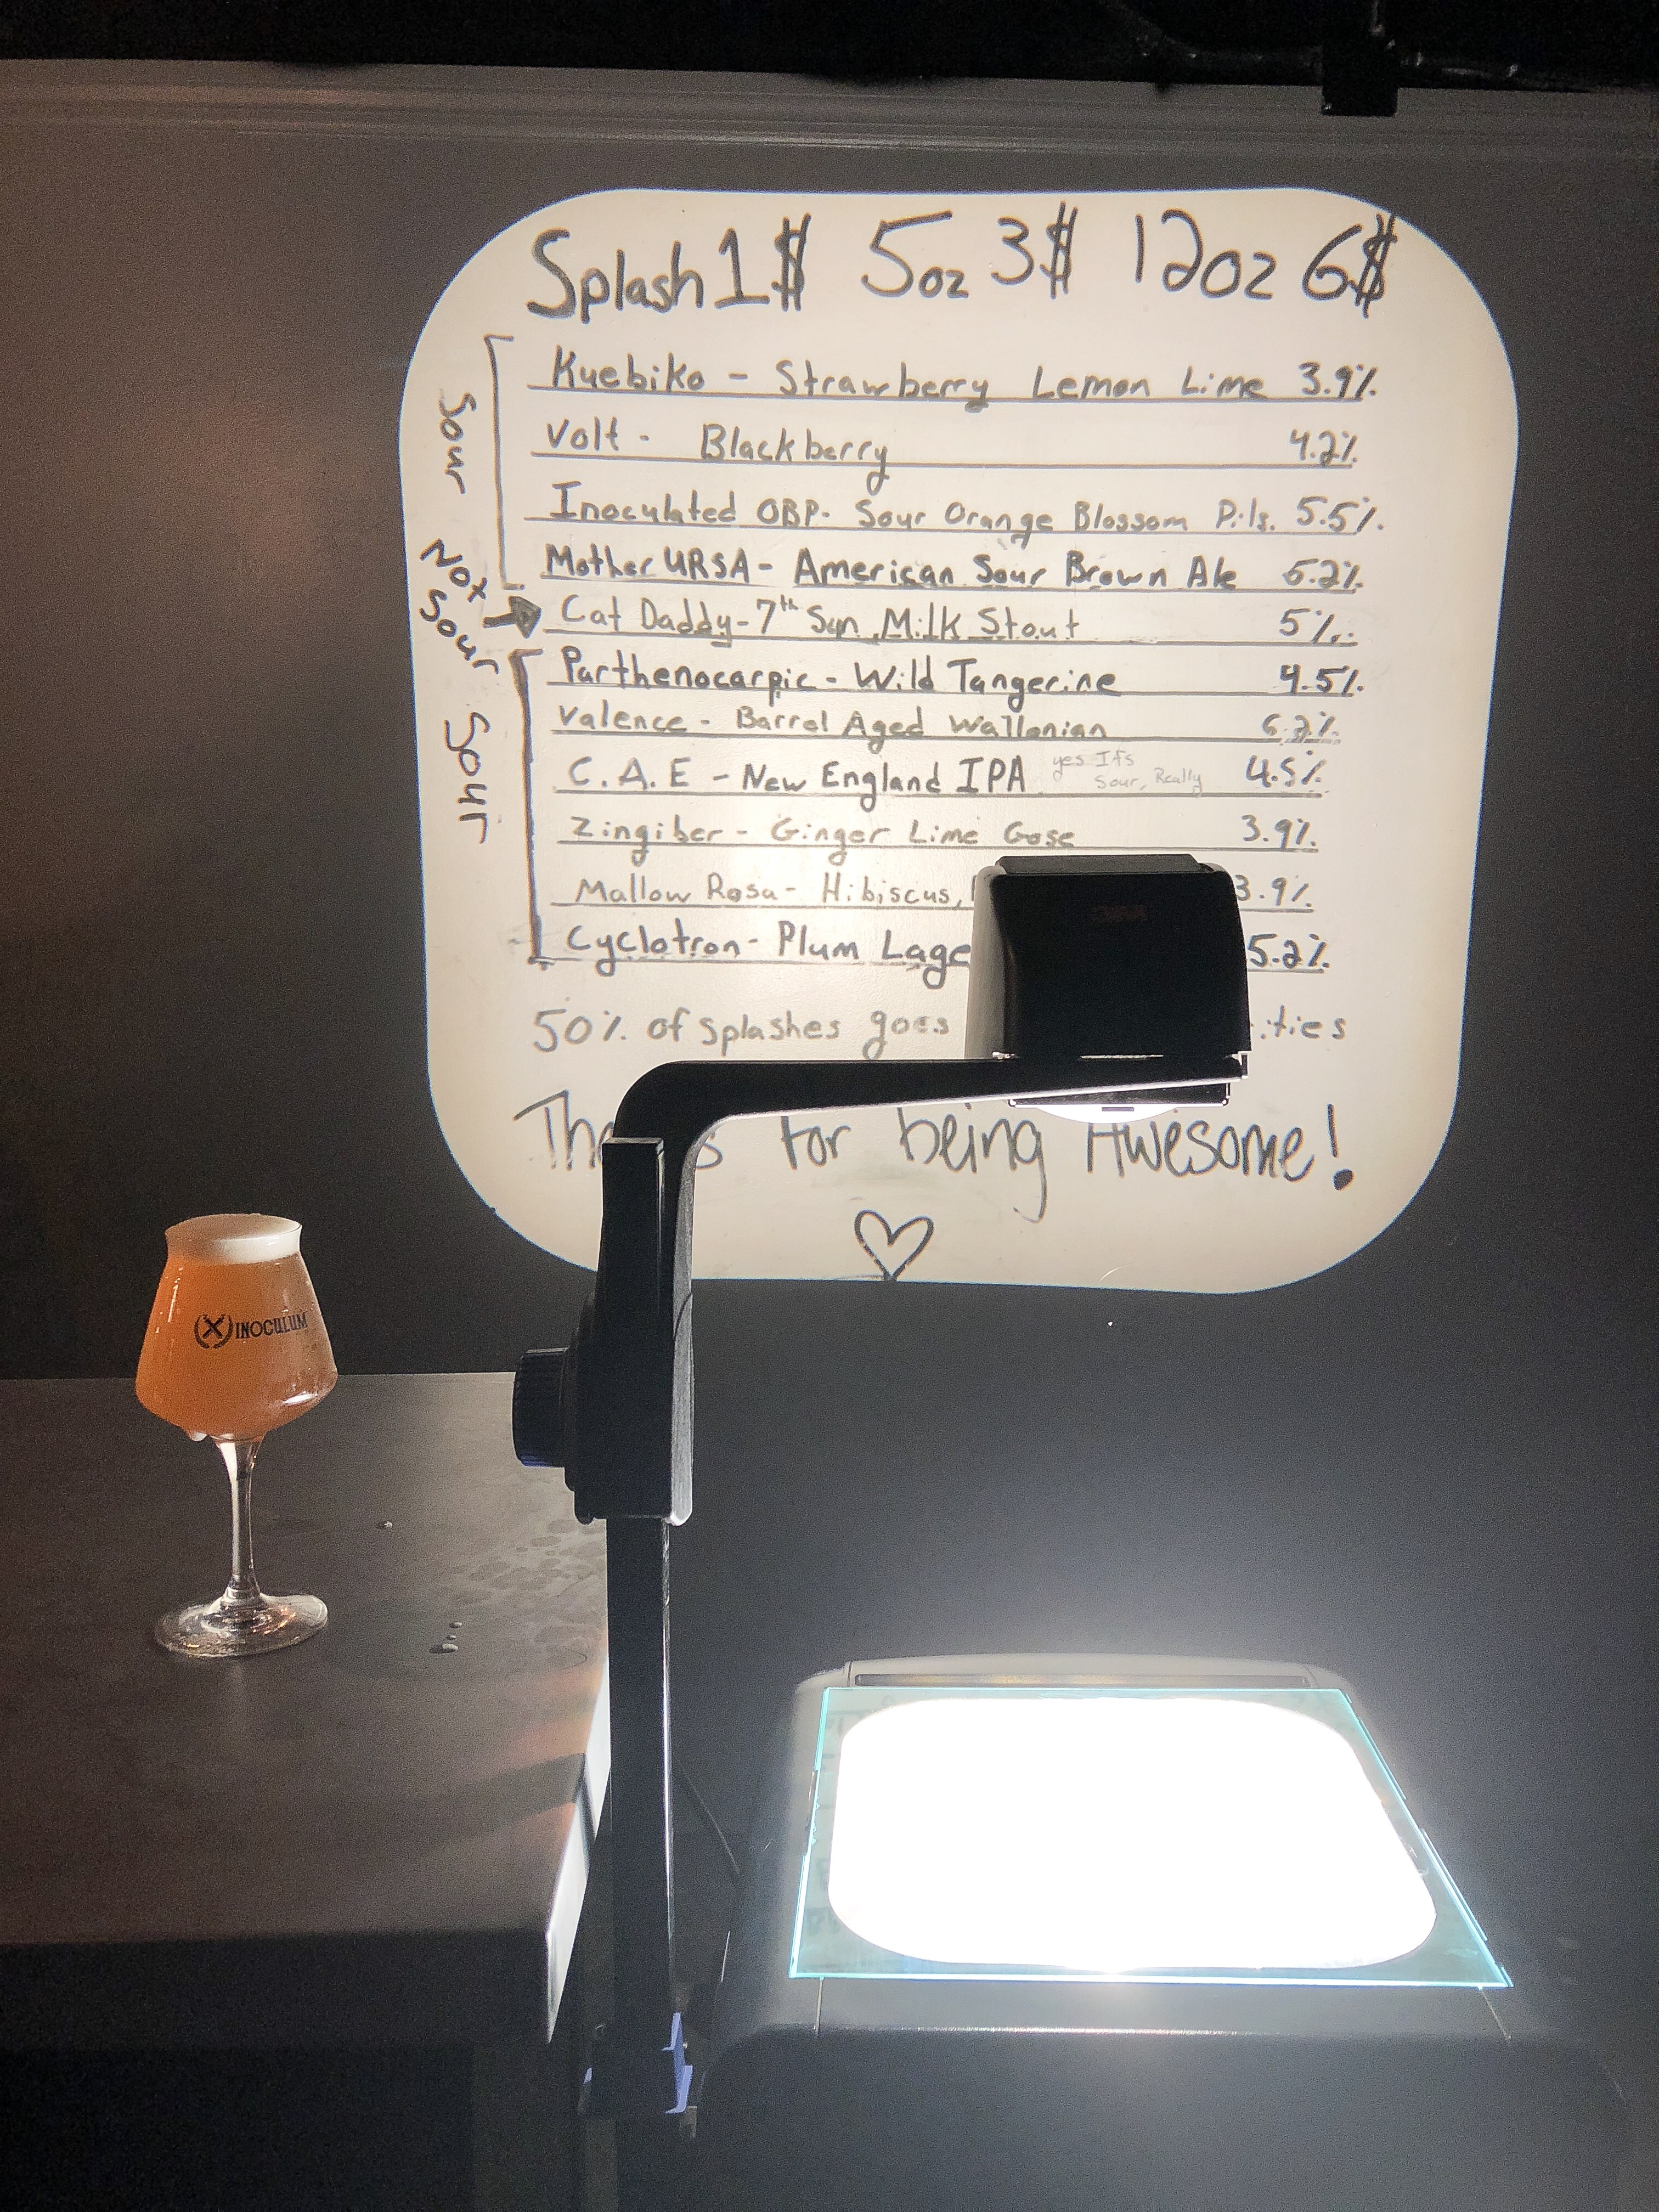 The Projector used to display the tap list